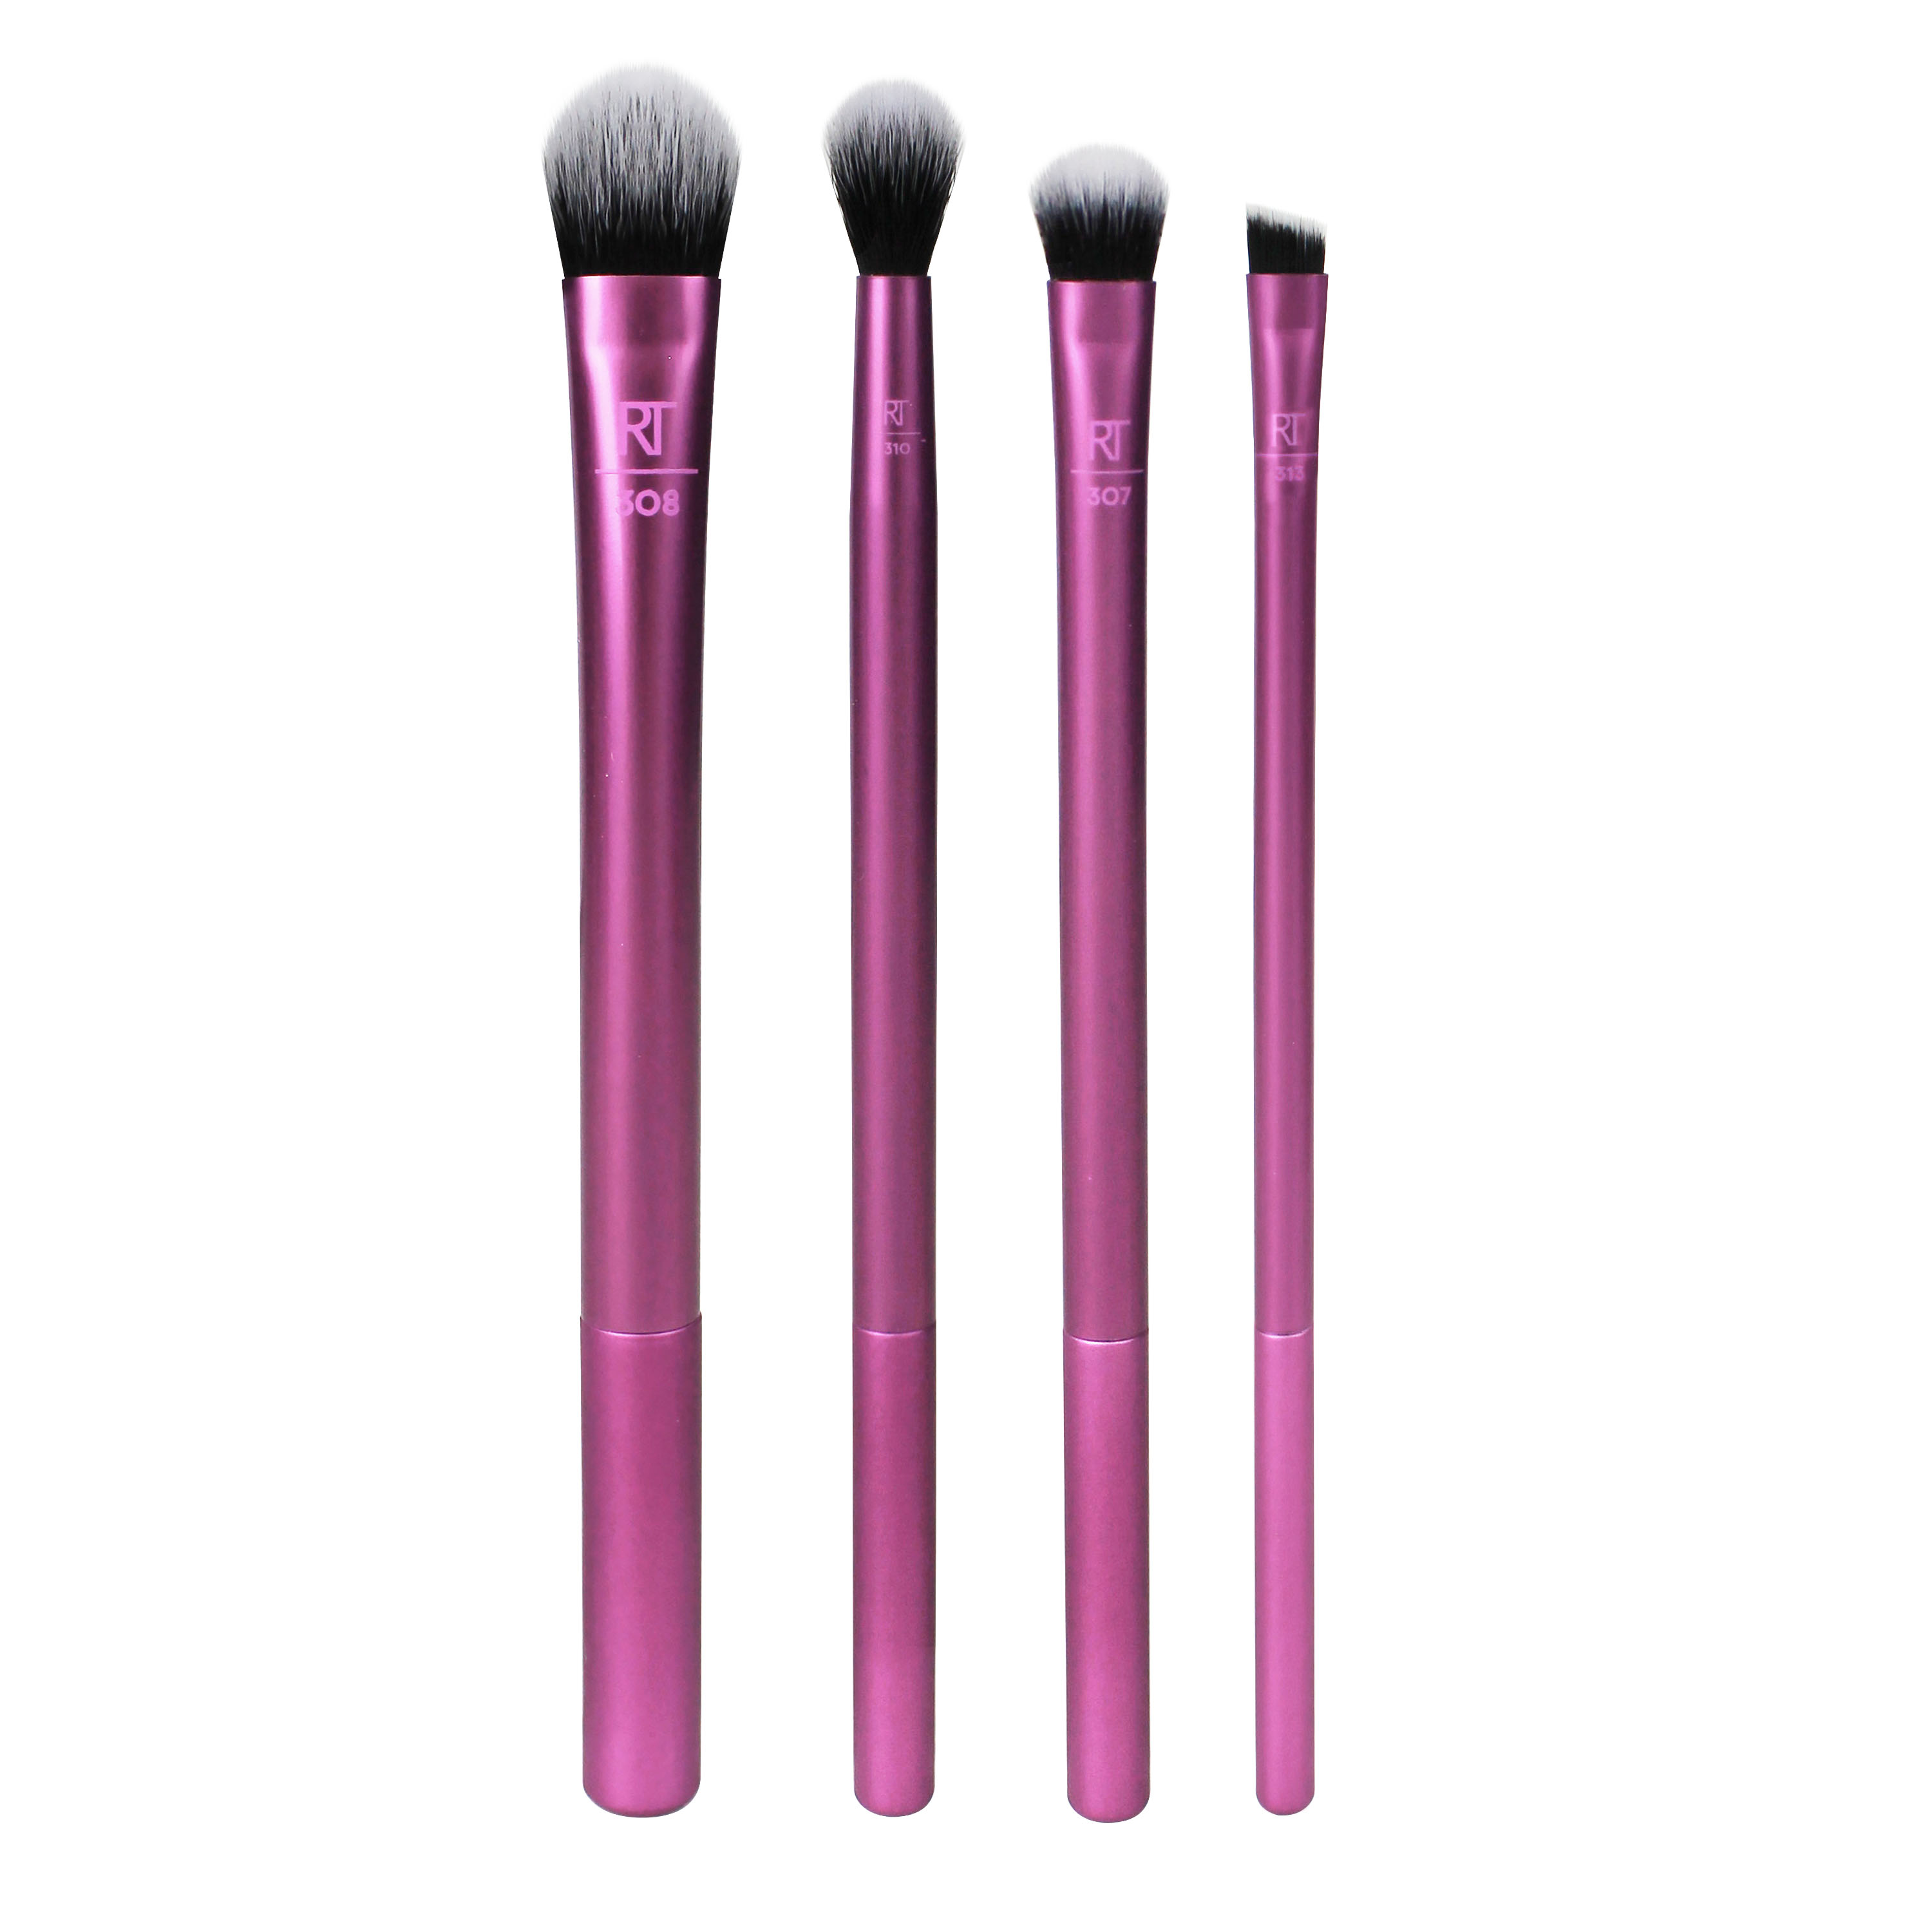 Real Techniques Enhanced Eye Makeup Brush Set, 4 Pieces - image 2 of 6